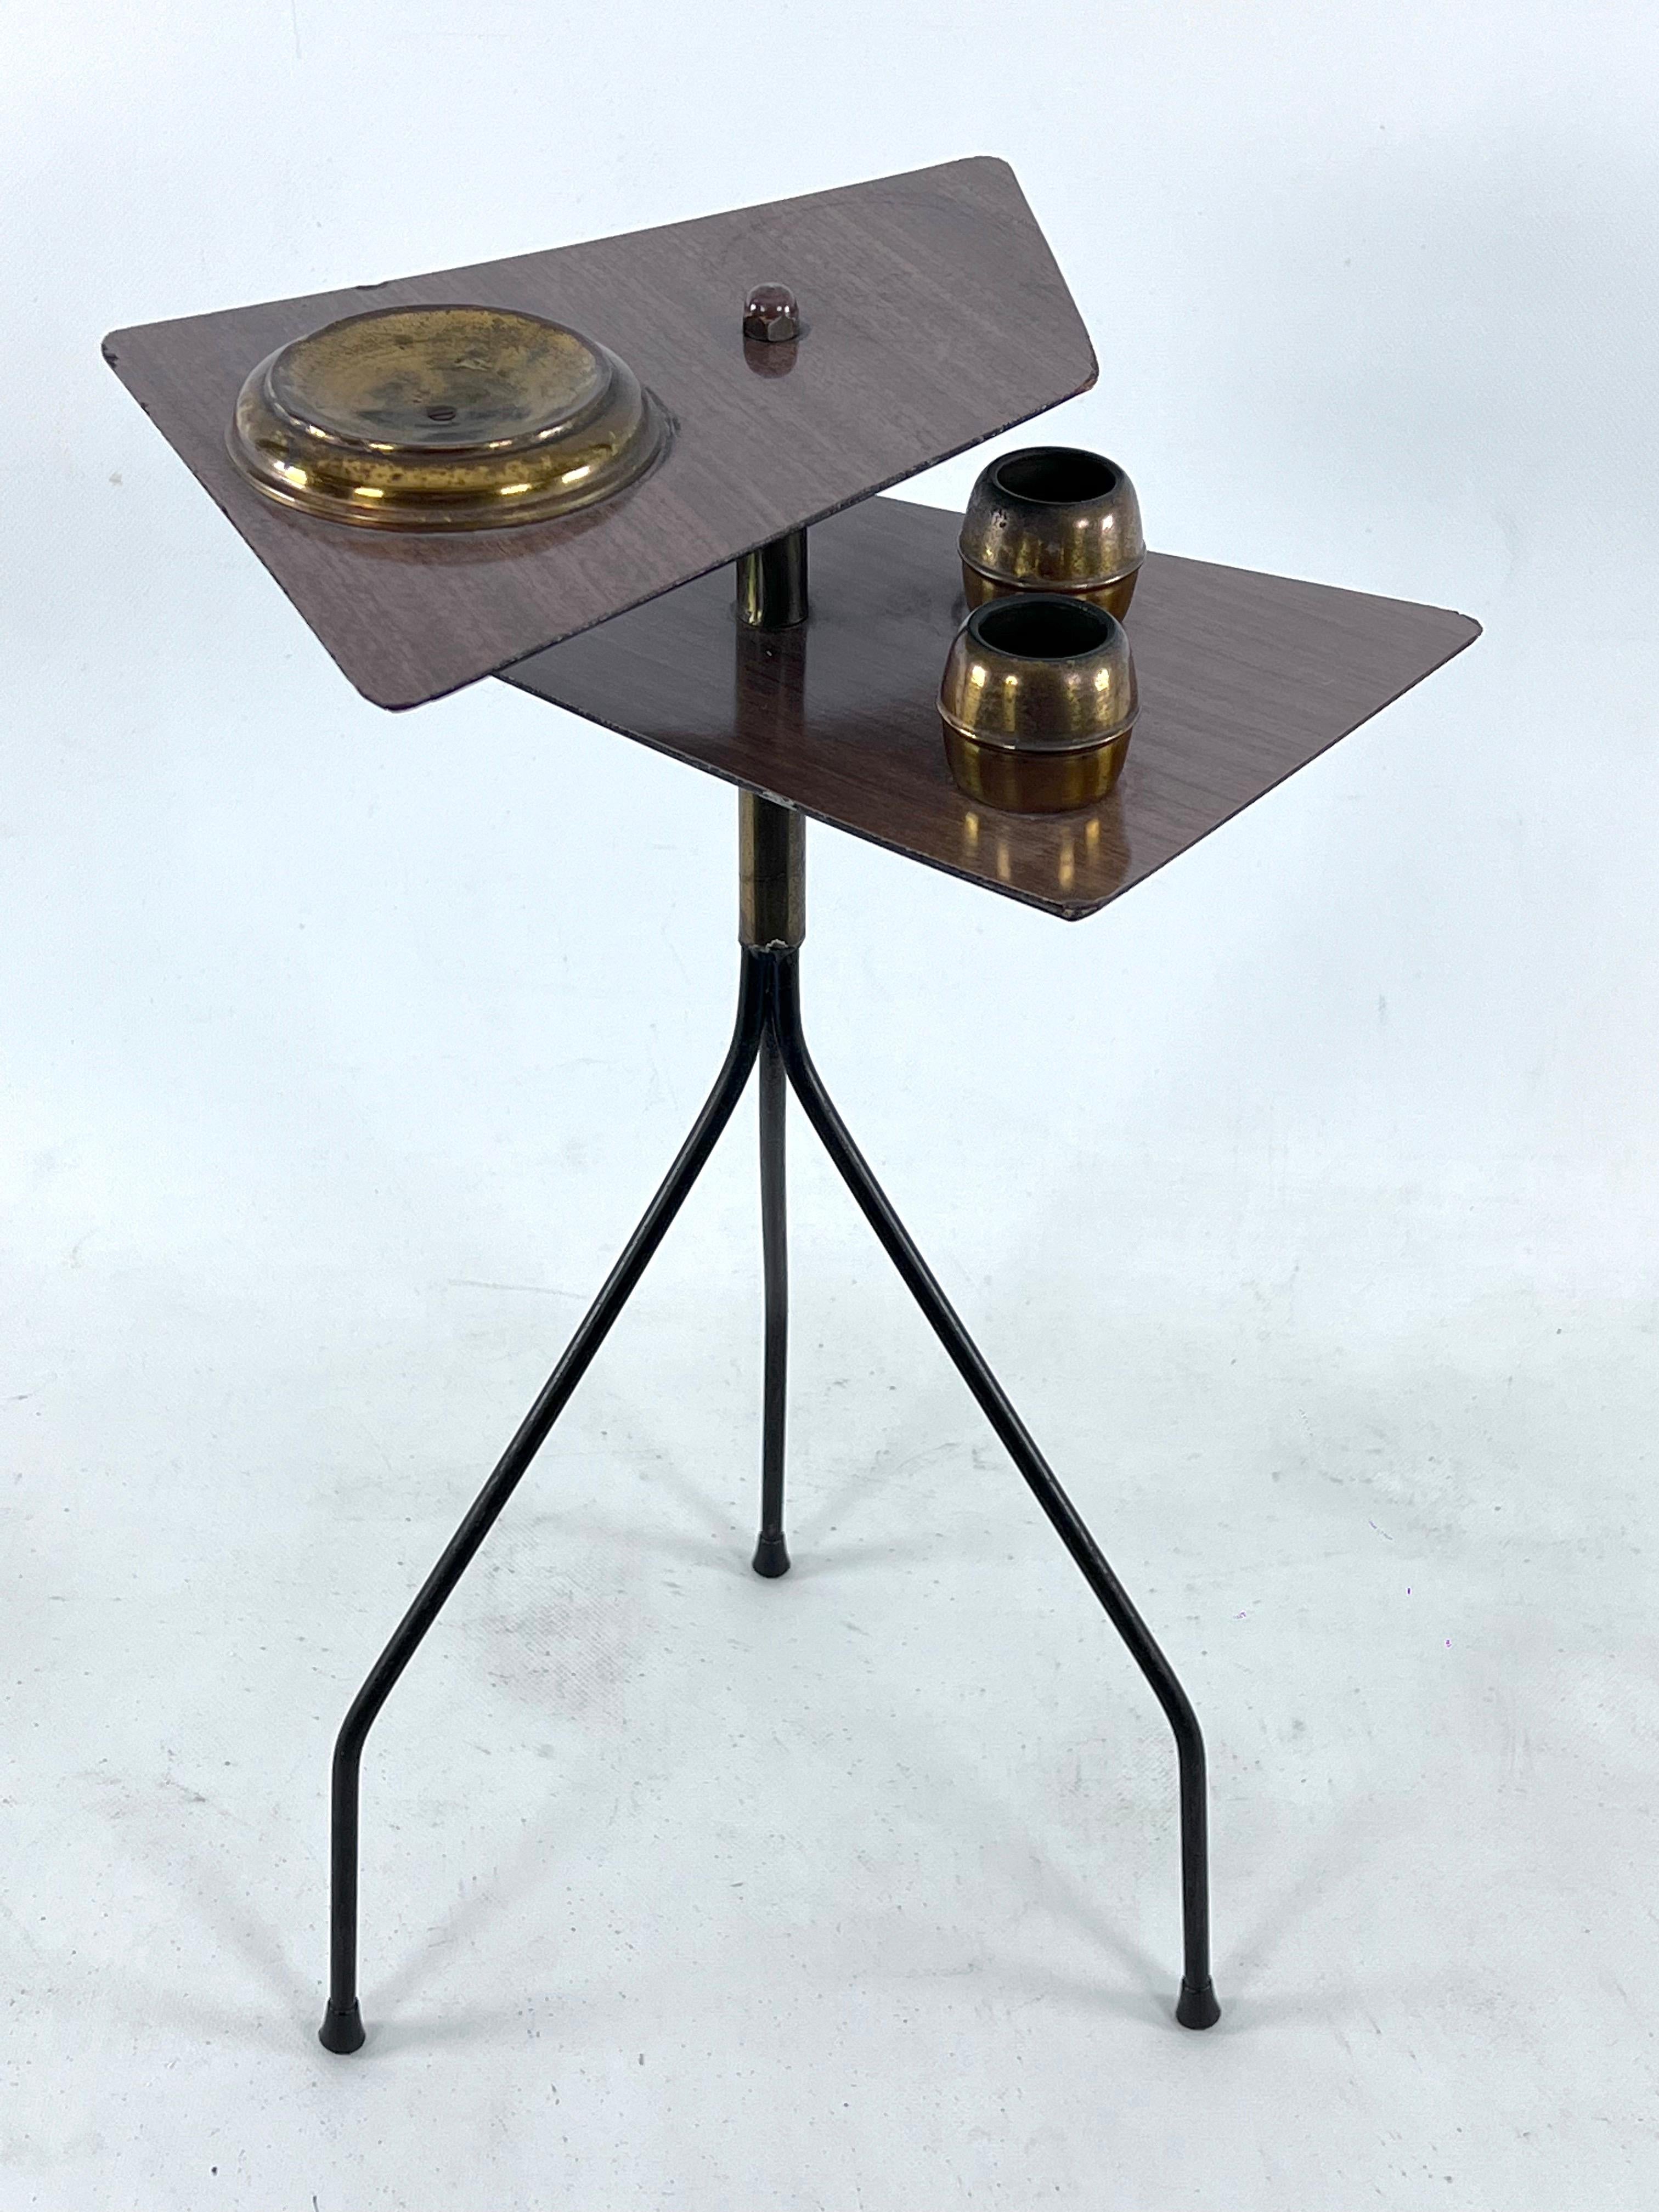 Good original vintage condition with trace of age and use for this ashtray tripod made from brass, black lacquered metal and formica with some small losses.
 